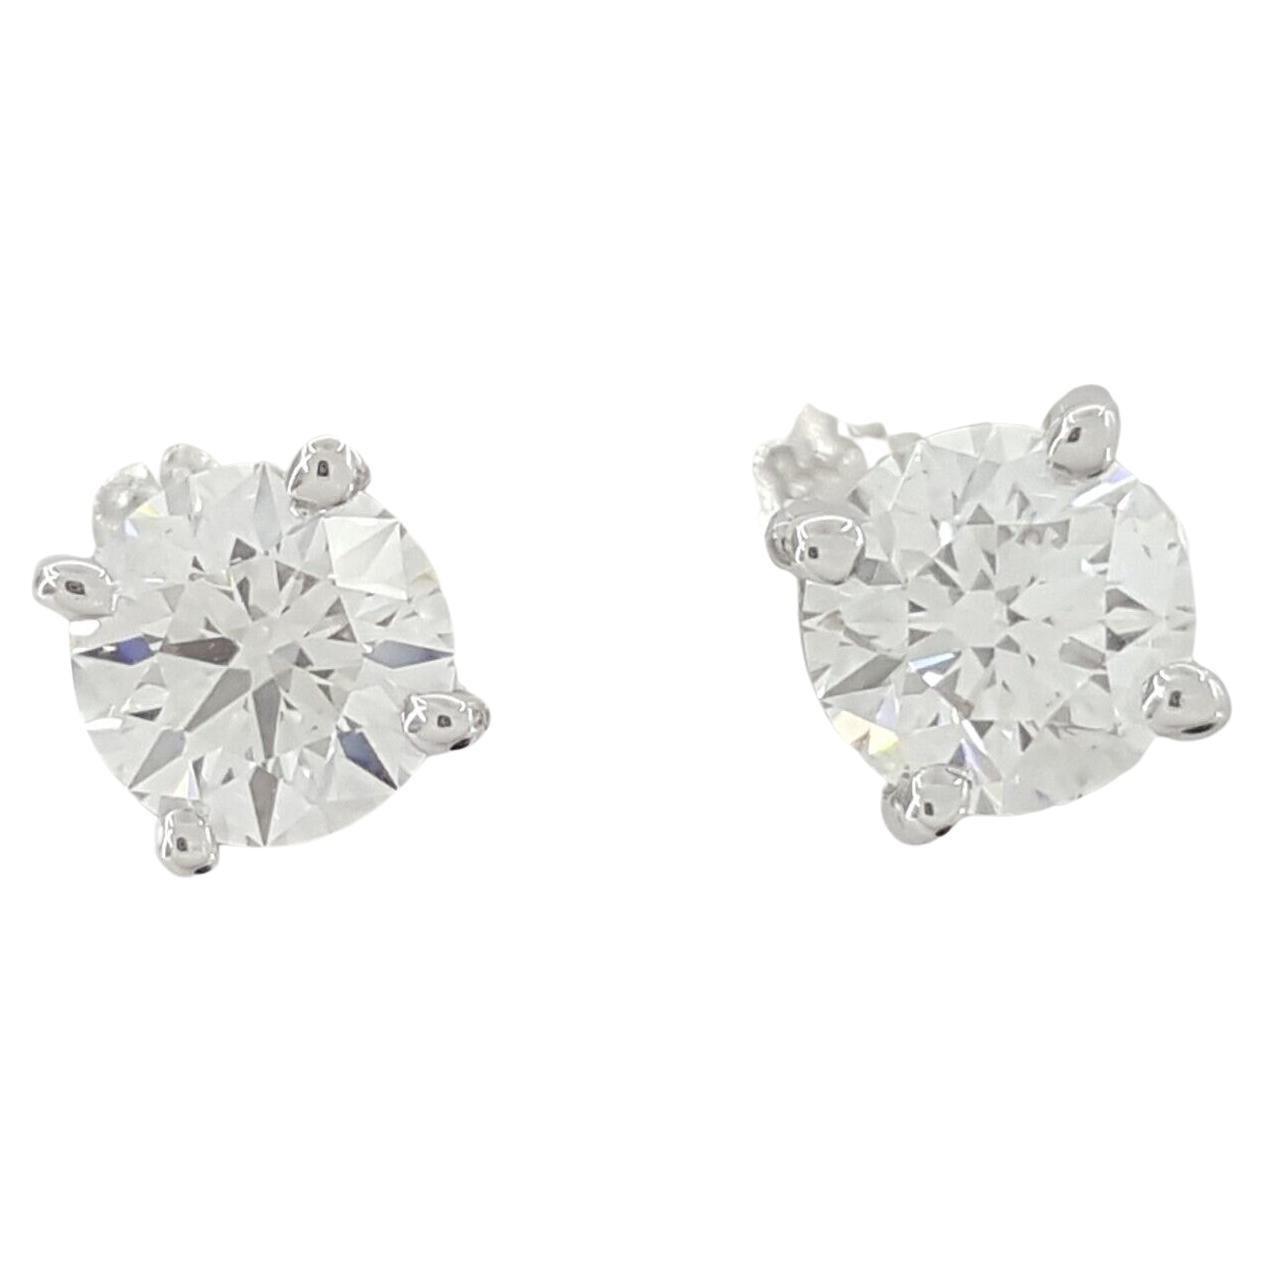 Introducing an exquisite pair of Tiffany & Co. diamond stud earrings, showcasing timeless elegance and exceptional craftsmanship.

Crafted from luxurious platinum, these earrings feature two natural round brilliant cut diamonds, each weighing 0.90